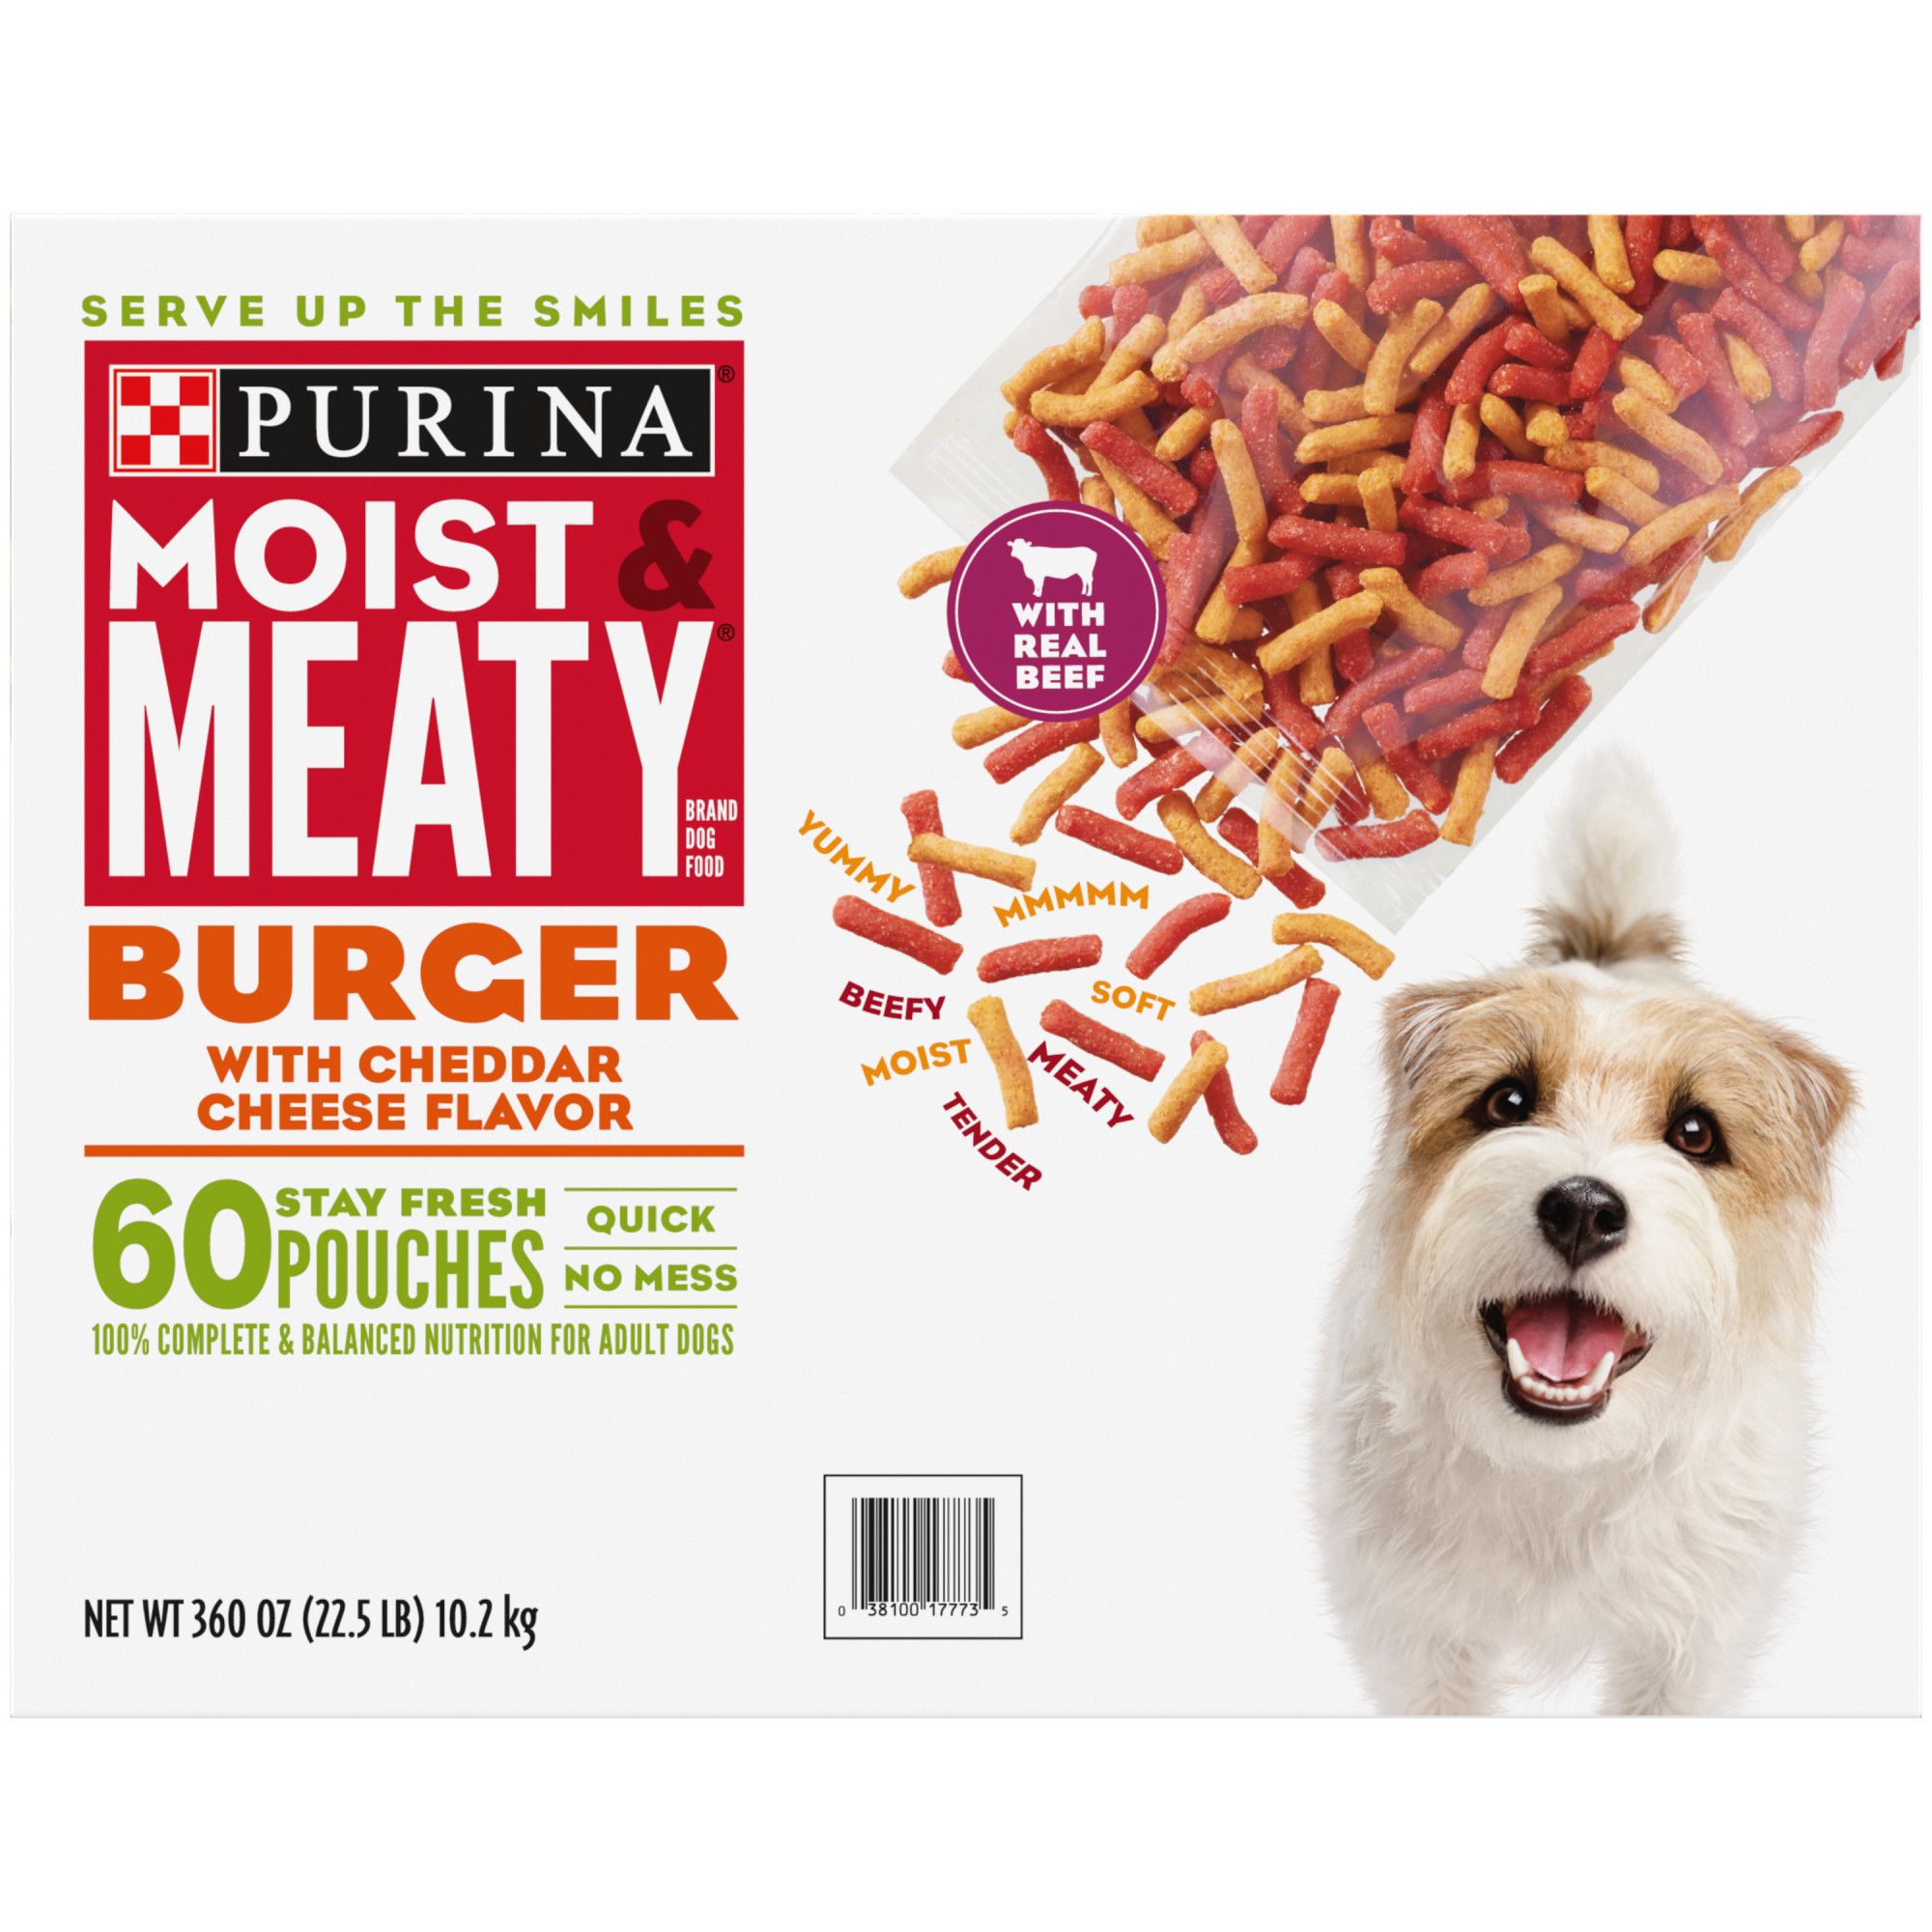 Purina Moist & Meaty Burger with Cheddar Cheese Flavor Dog Food, 60 ct./6 oz.